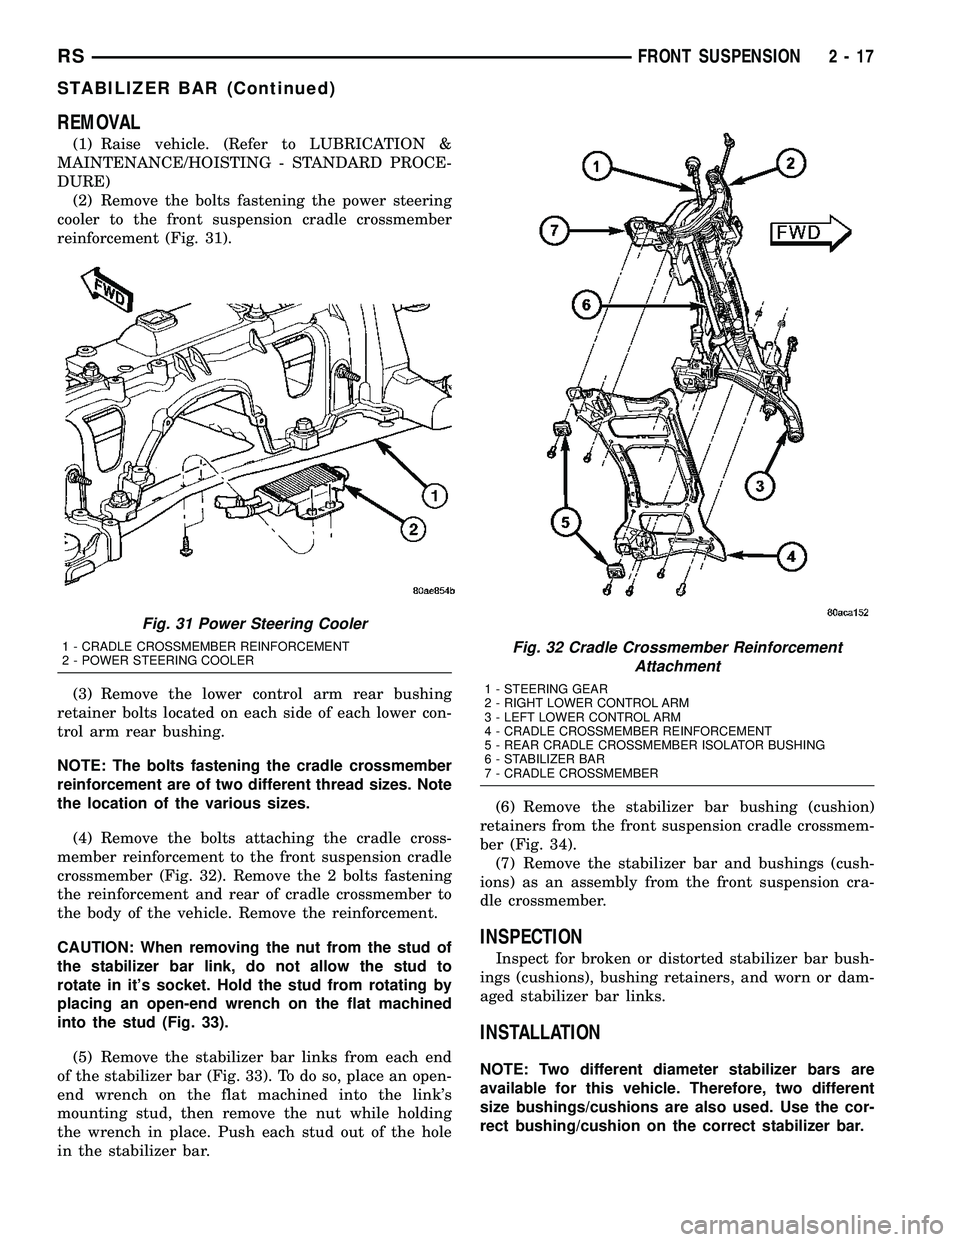 CHRYSLER CARAVAN 2005  Service Manual REMOVAL
(1) Raise vehicle. (Refer to LUBRICATION &
MAINTENANCE/HOISTING - STANDARD PROCE-
DURE)
(2) Remove the bolts fastening the power steering
cooler to the front suspension cradle crossmember
rein